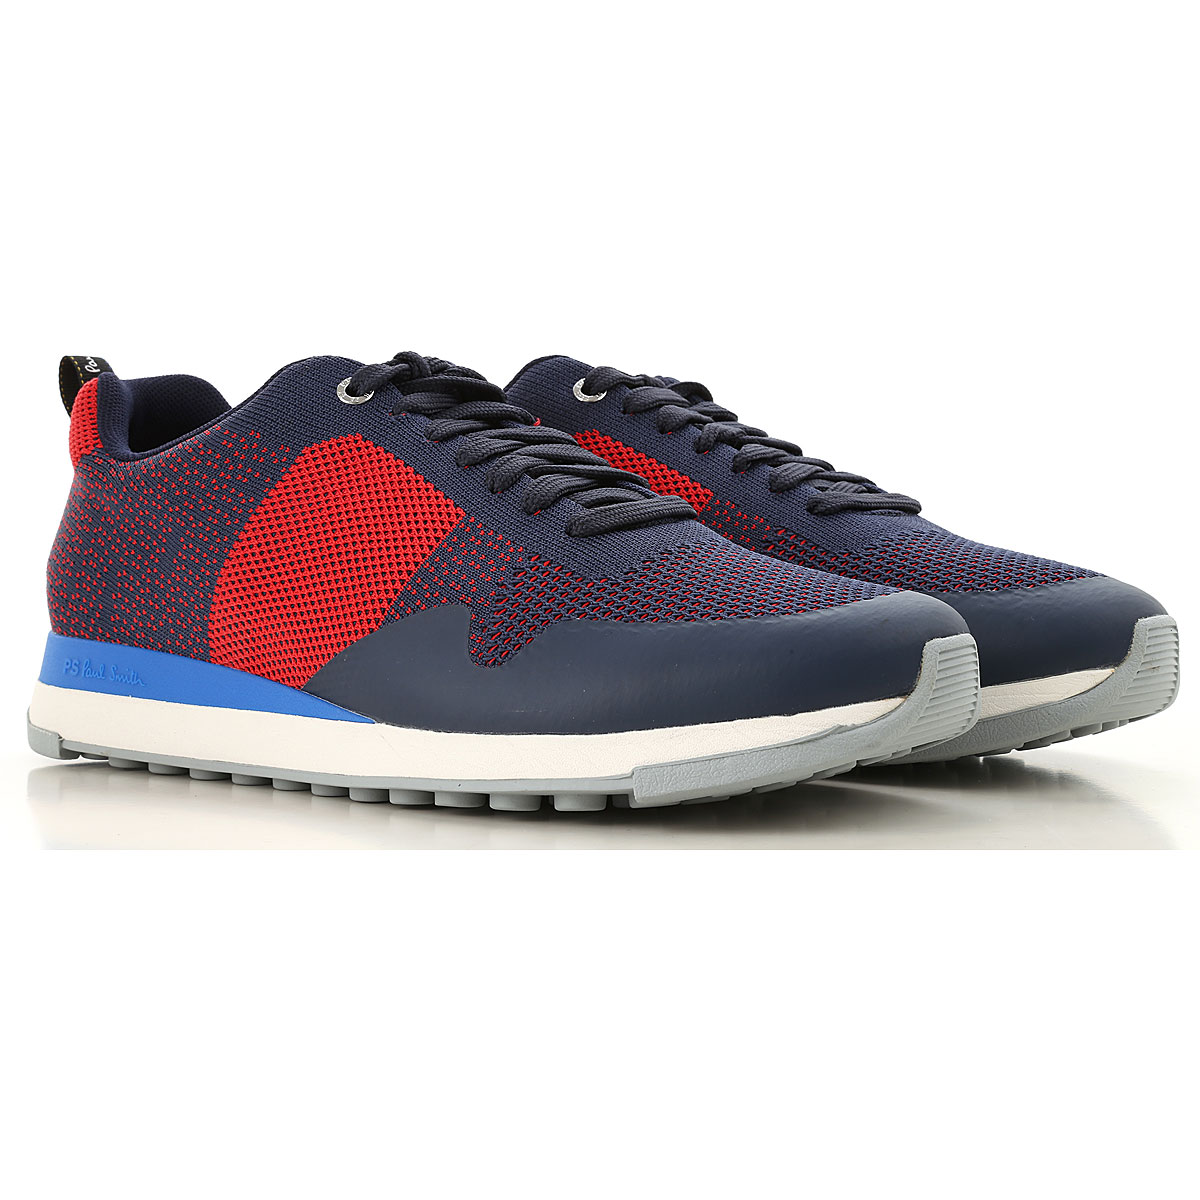 Mens Shoes Paul Smith, Style code: m2s-rap11-anyl